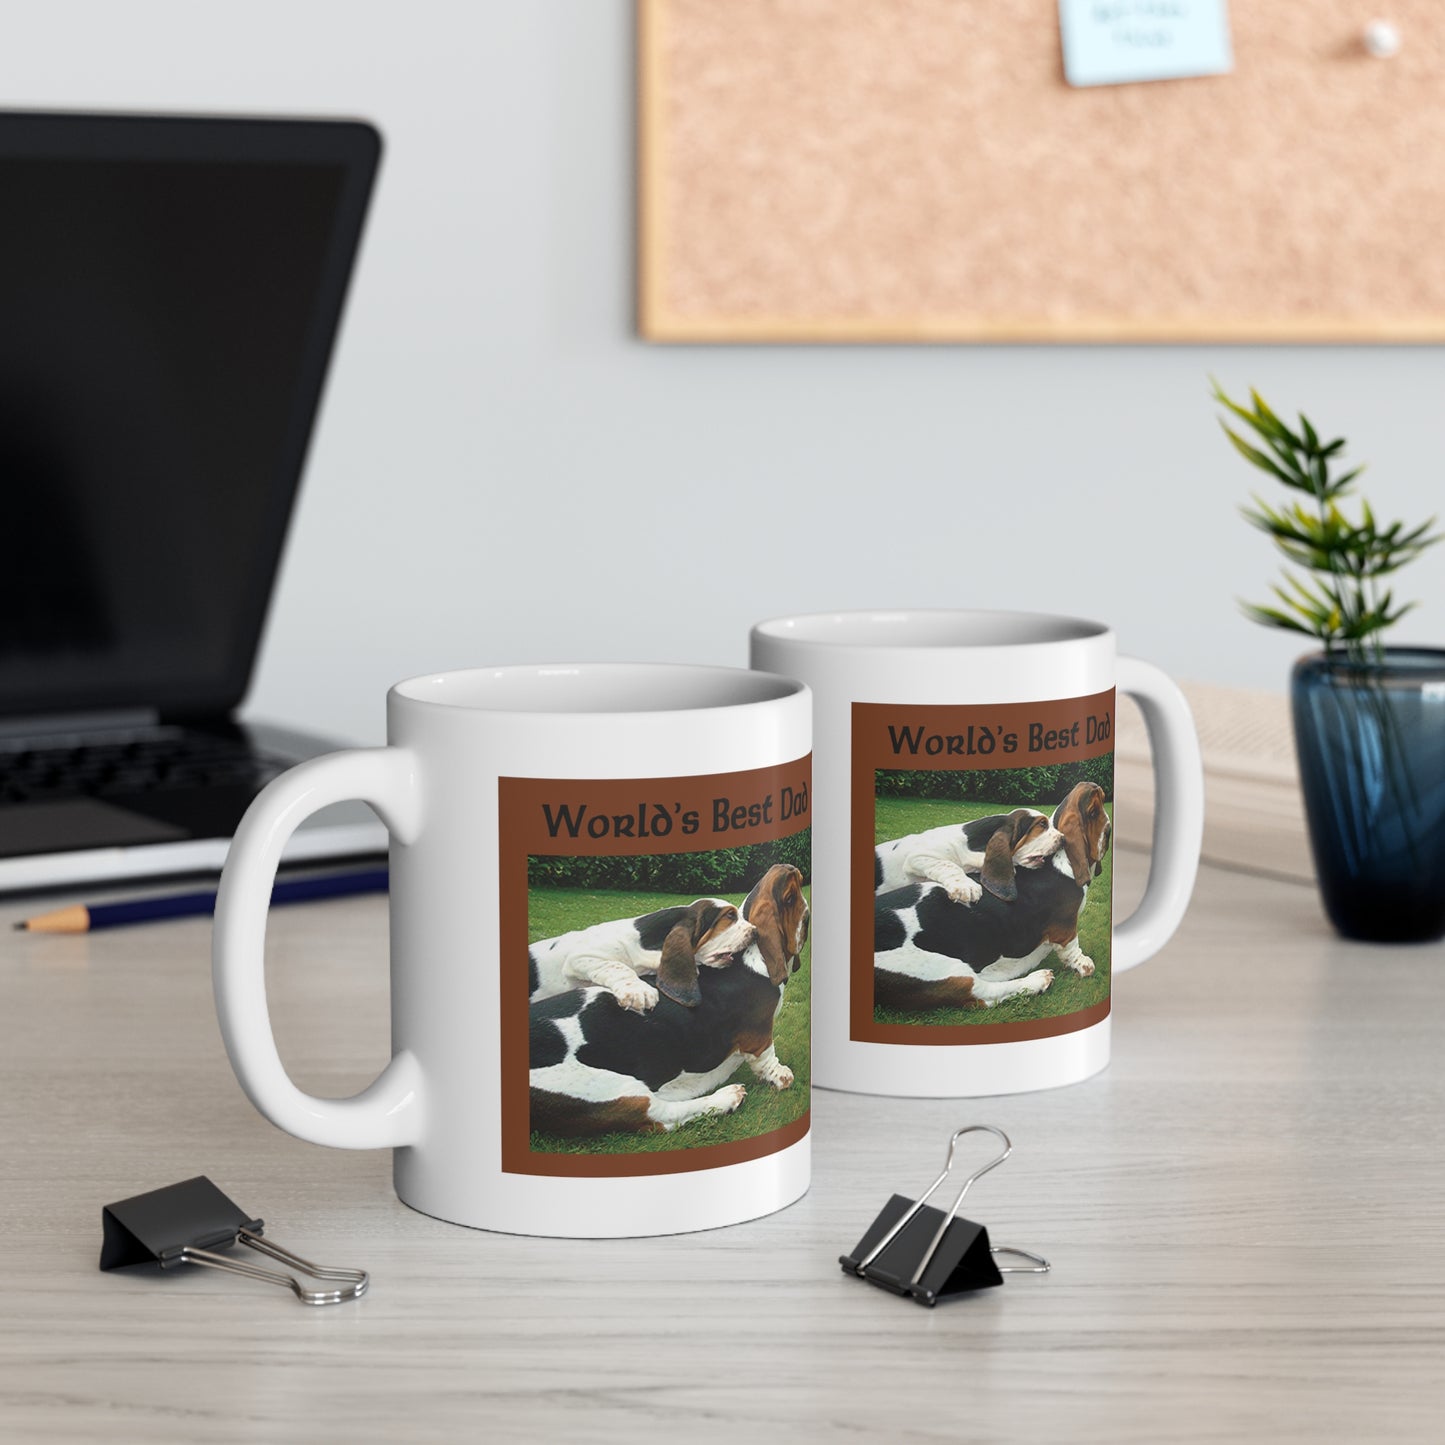 Father's Day Basset Hounds World's Best Dad Coffee Mug